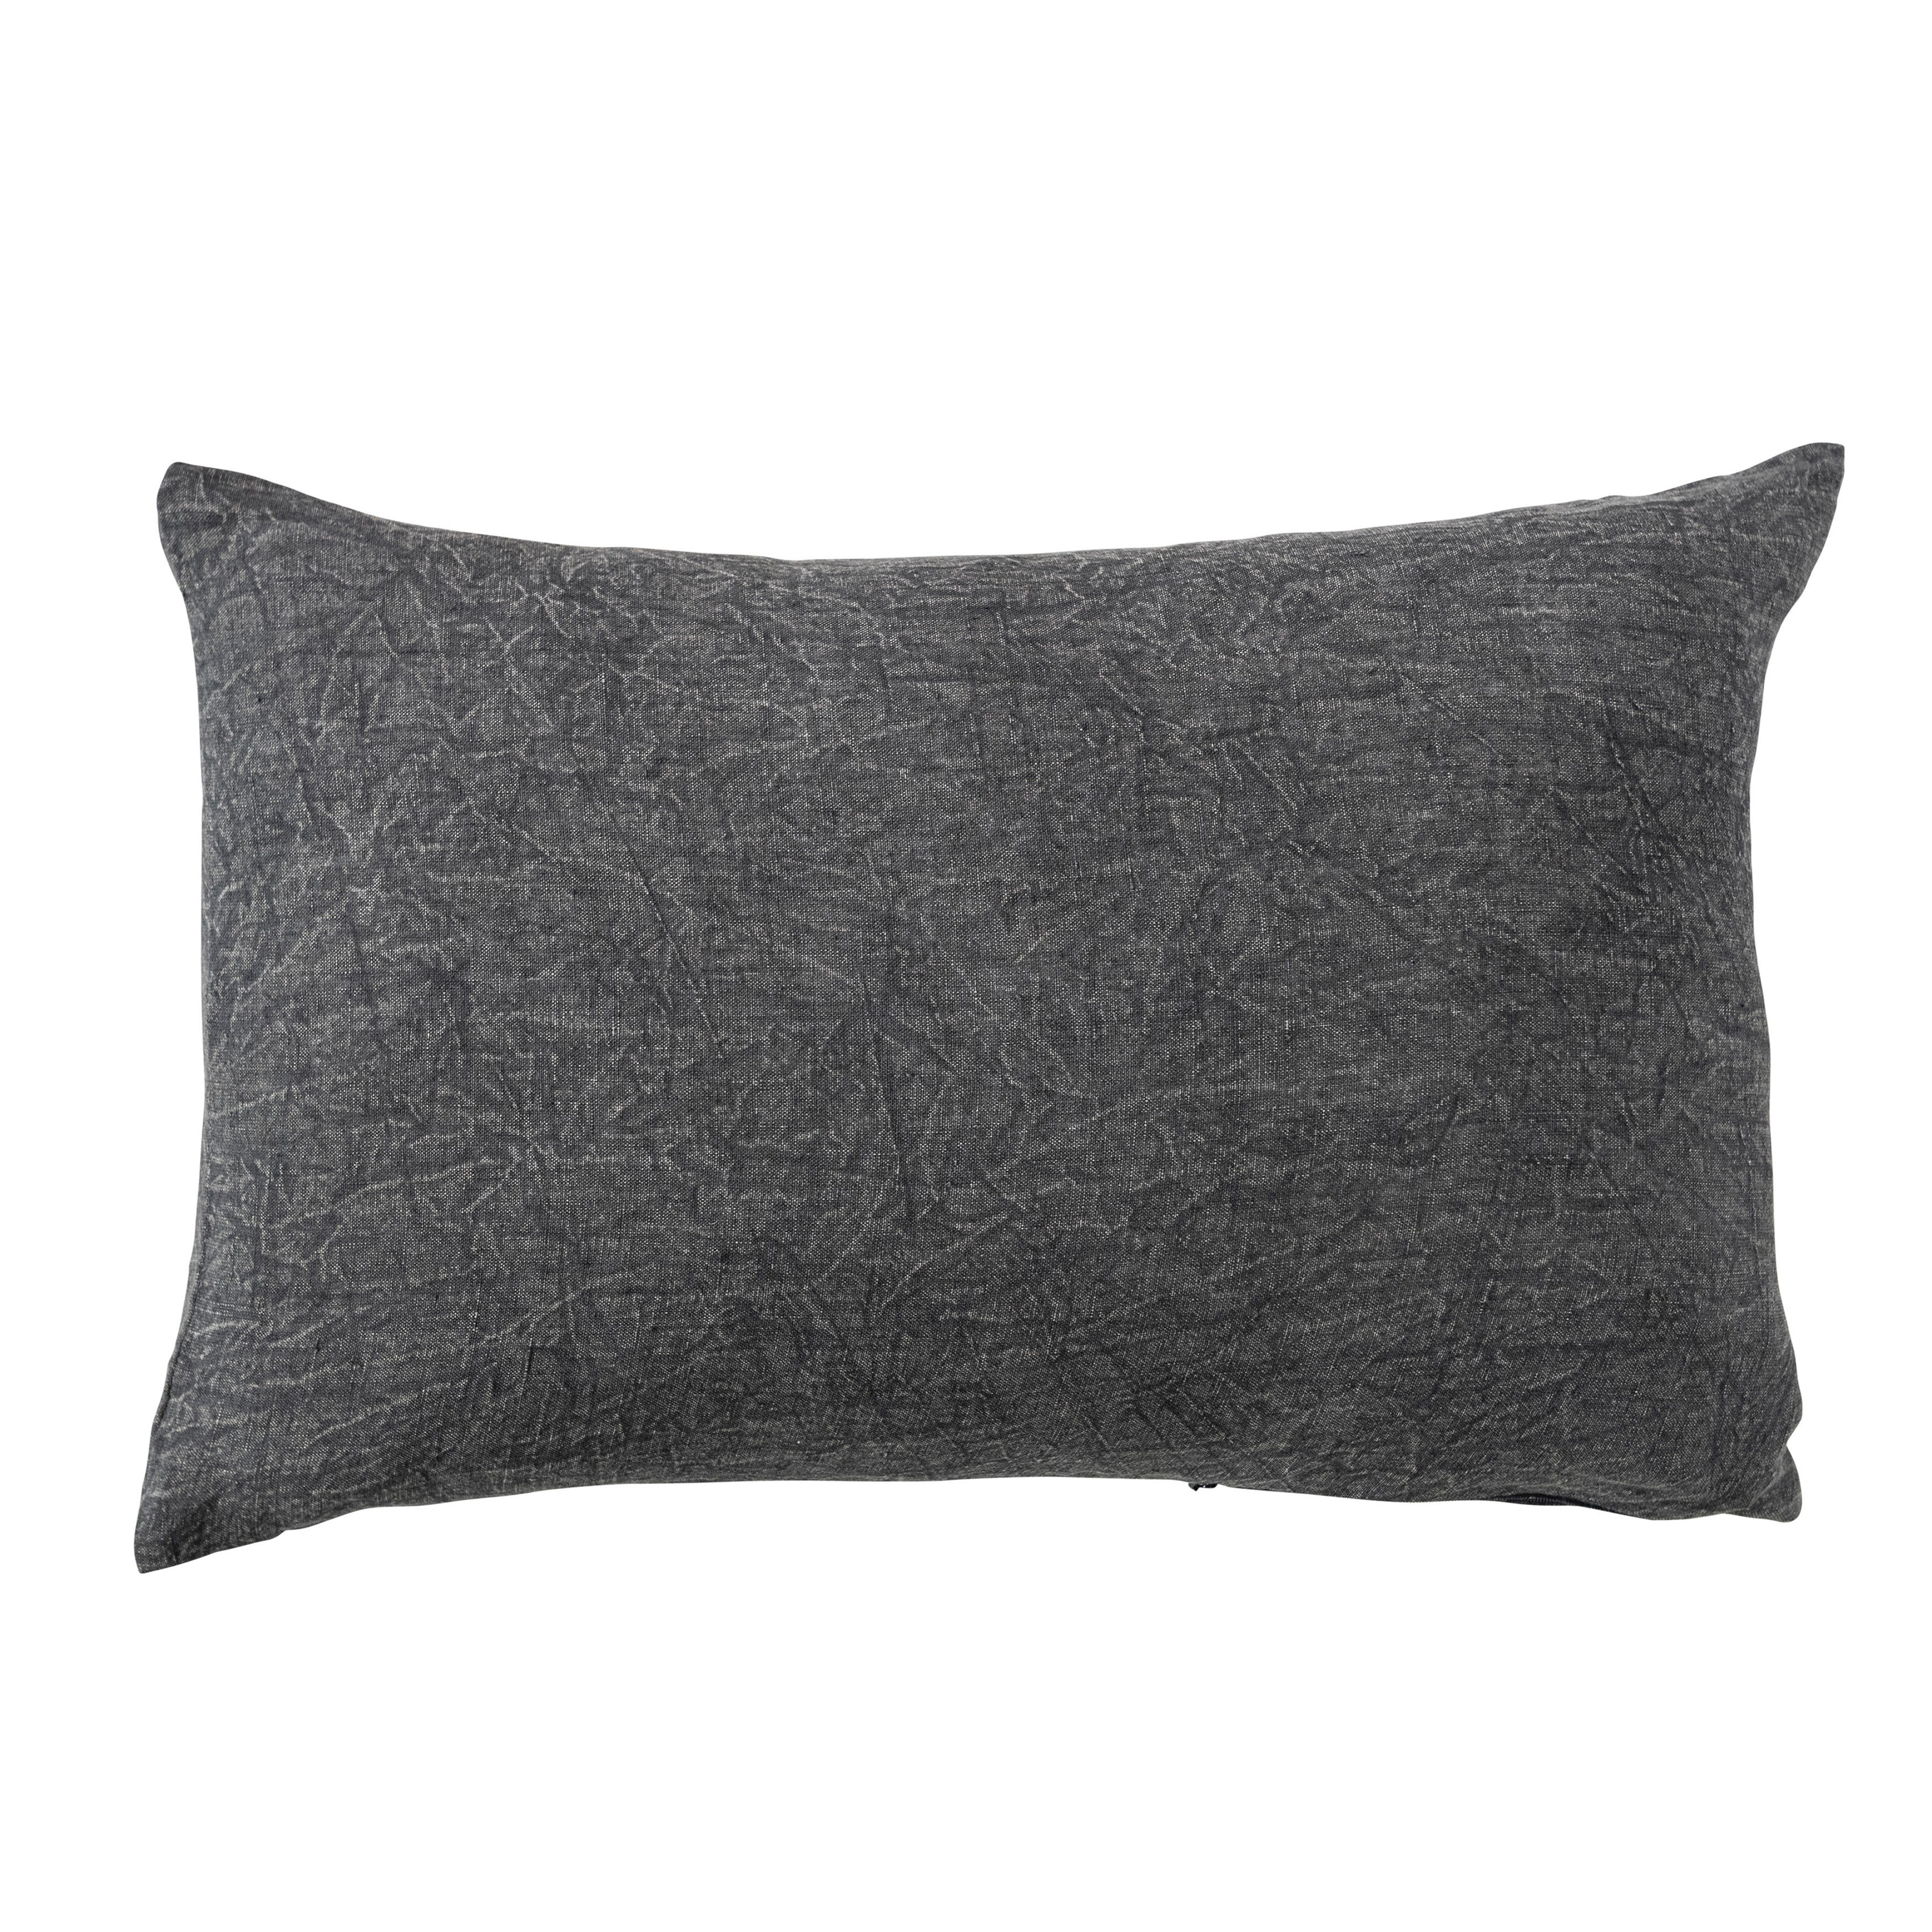 24 Inches Stonewashed Linen Lumbar Pillow, Charcoal - Image 0